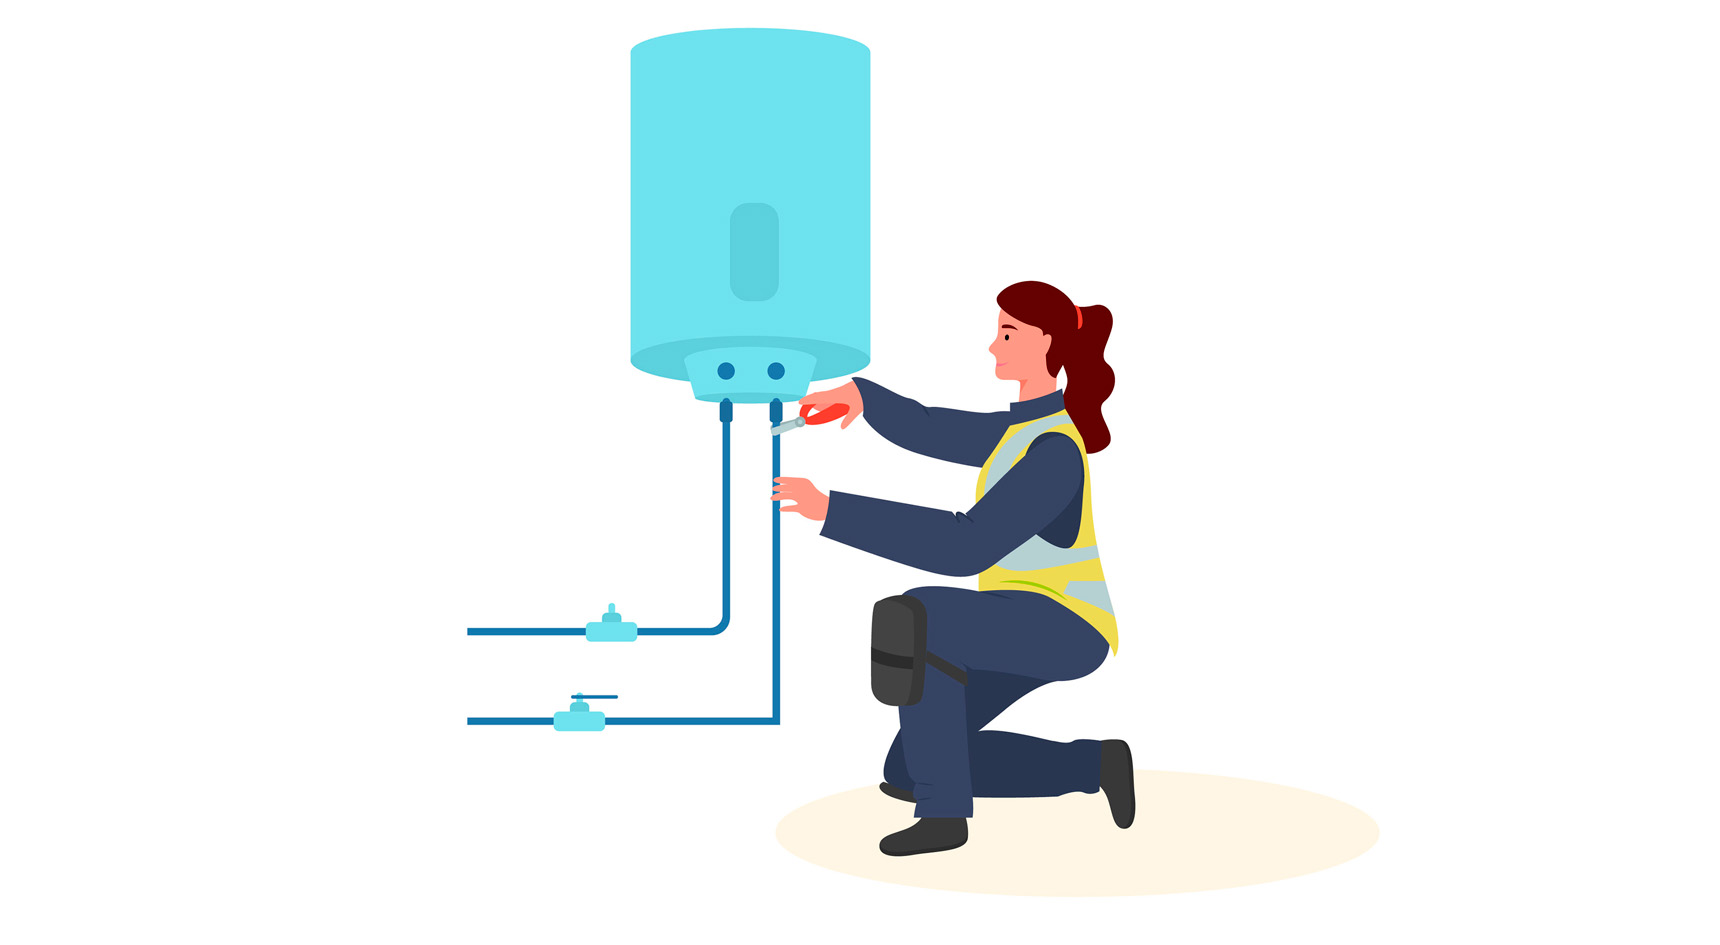 Illustration of female plumber inspecting a hot water service. Image: Getty.